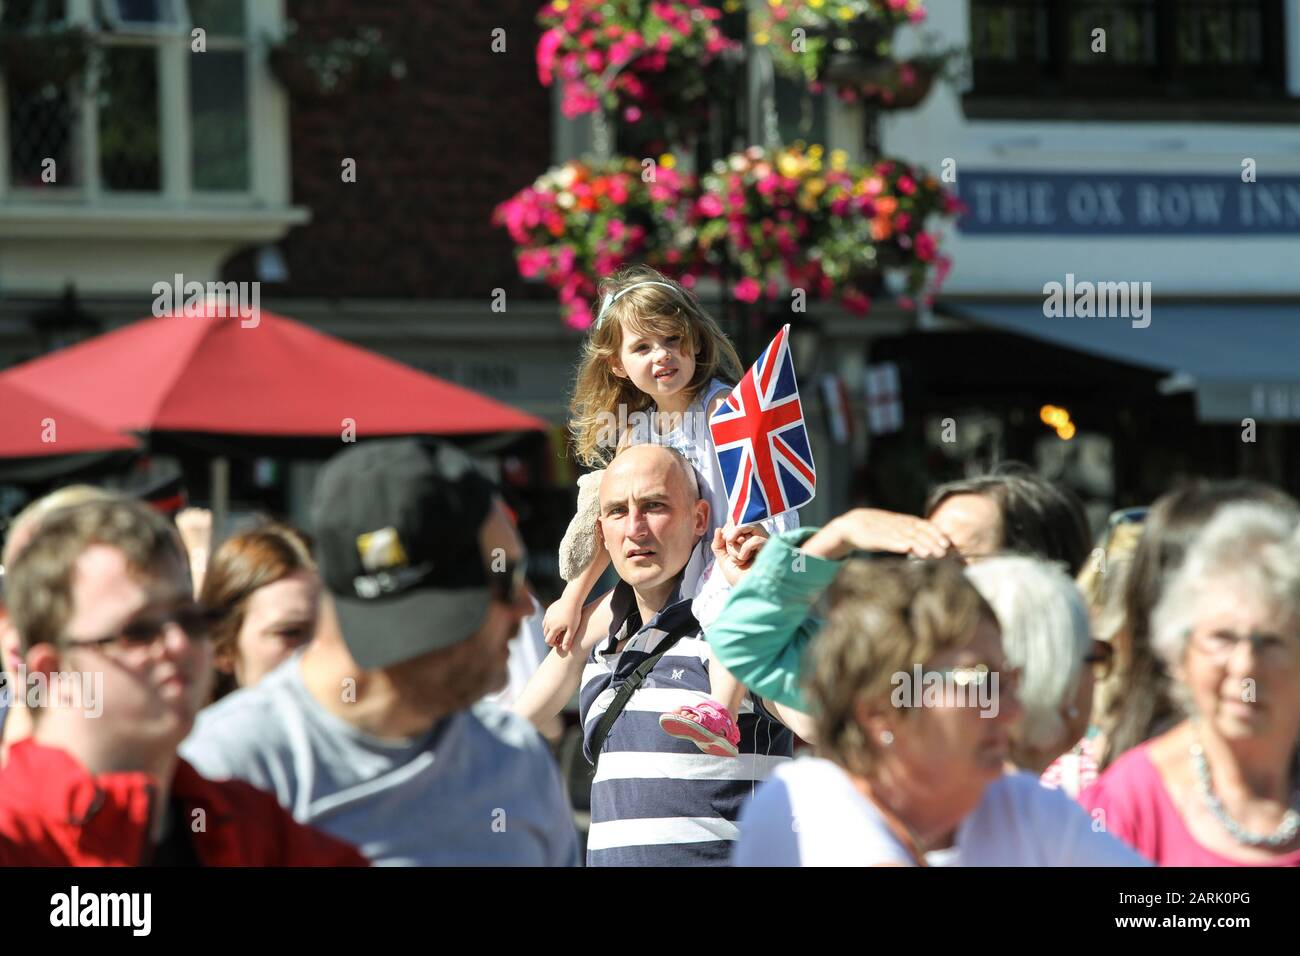 HRH Prince Charles, Prince of Wales and the Duchess of Cornwall visiting Salisbury after the first Russian Spy Poisoning Novichok incident. Stock Photo